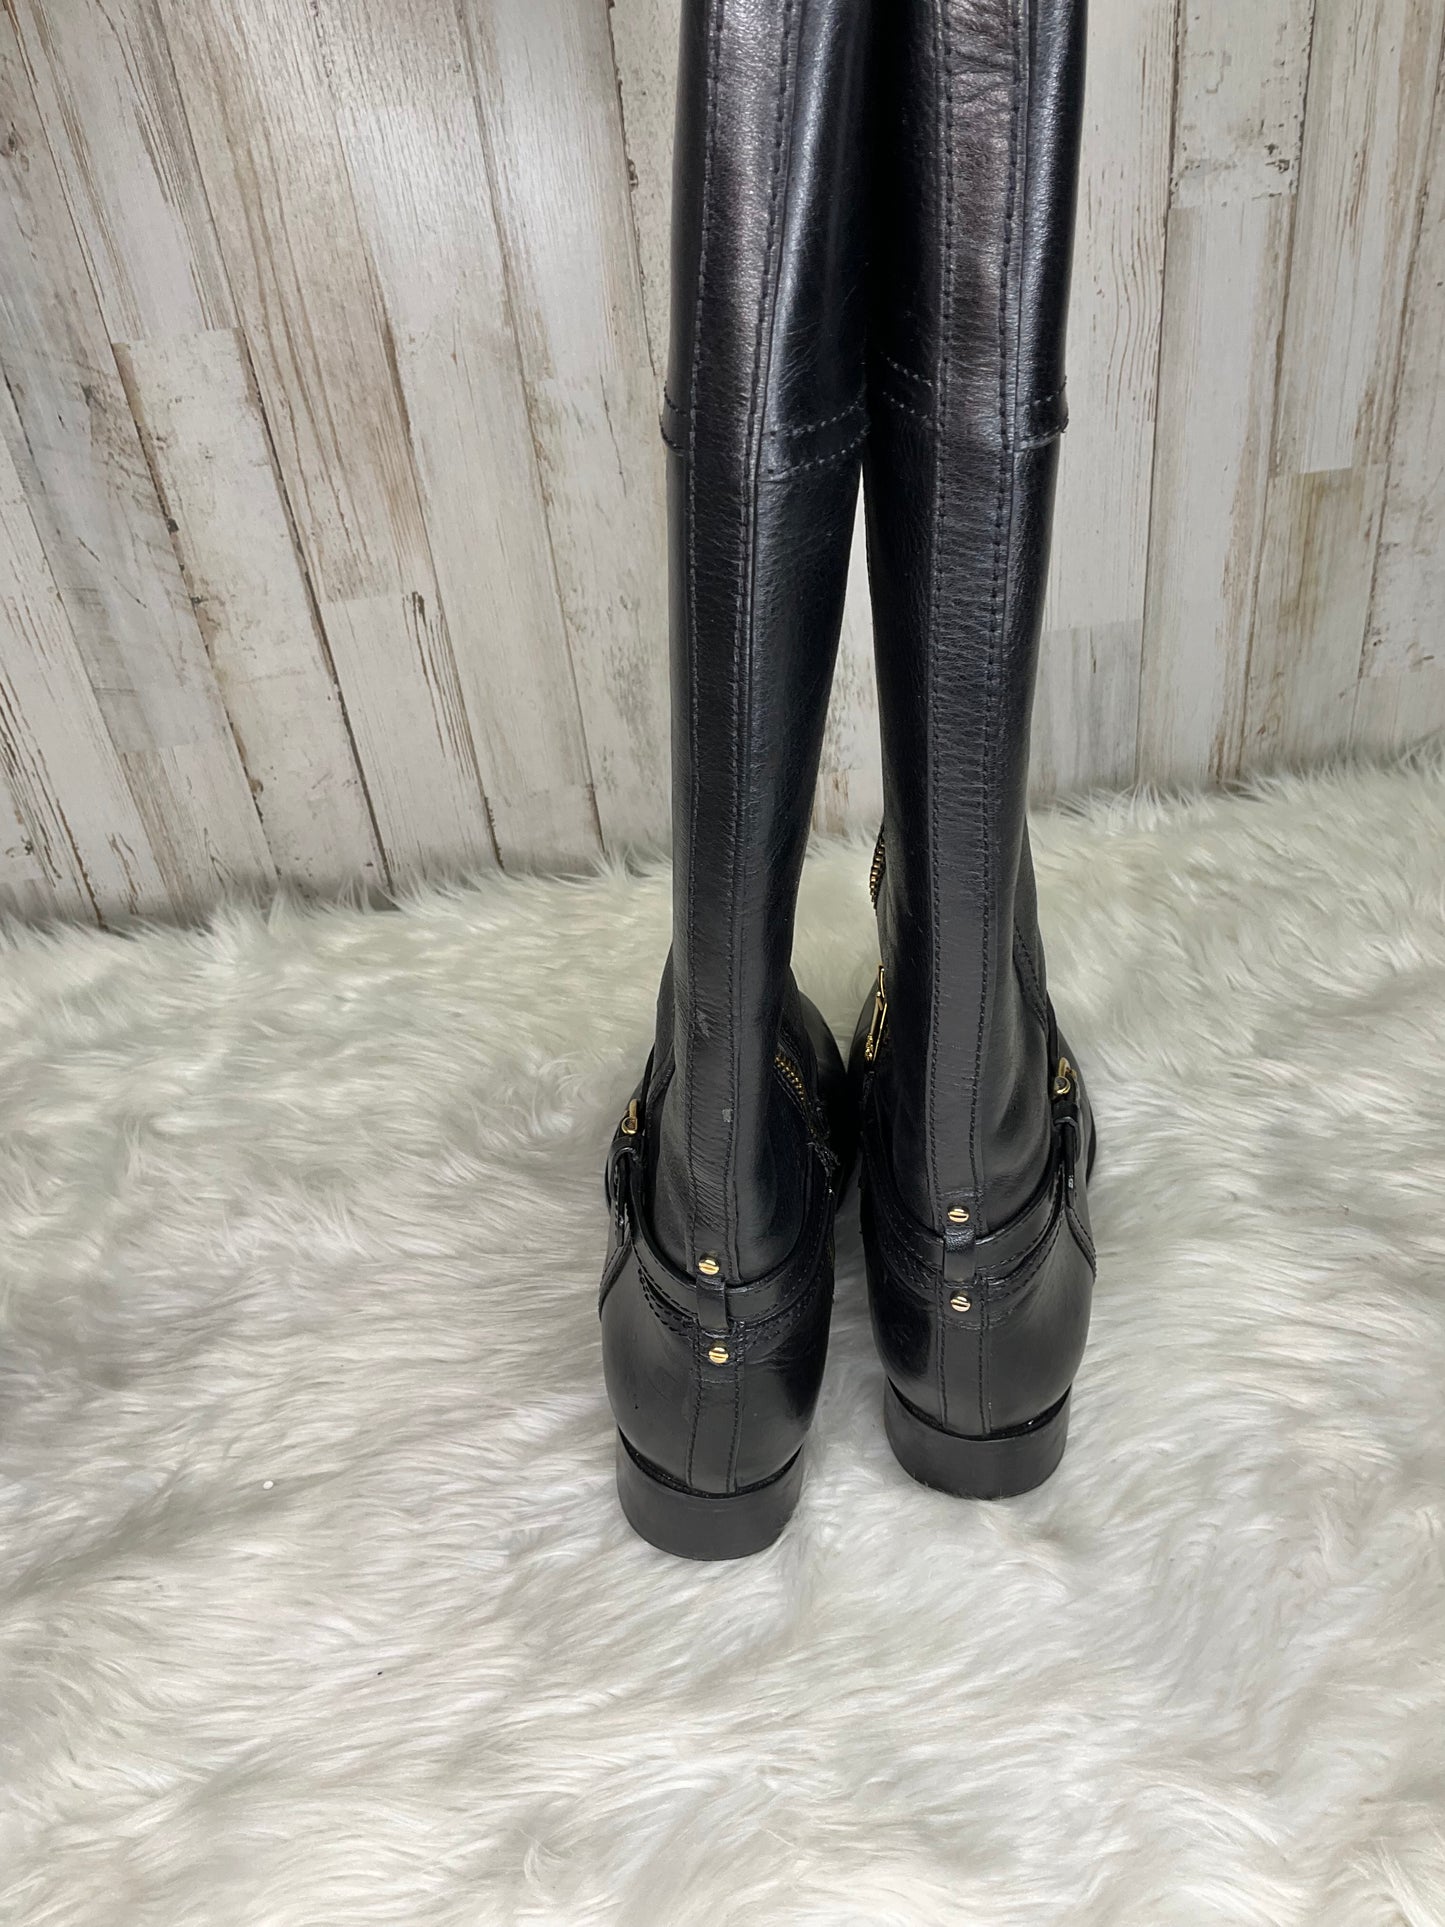 Boots Knee Flats By Tory Burch  Size: 8.5